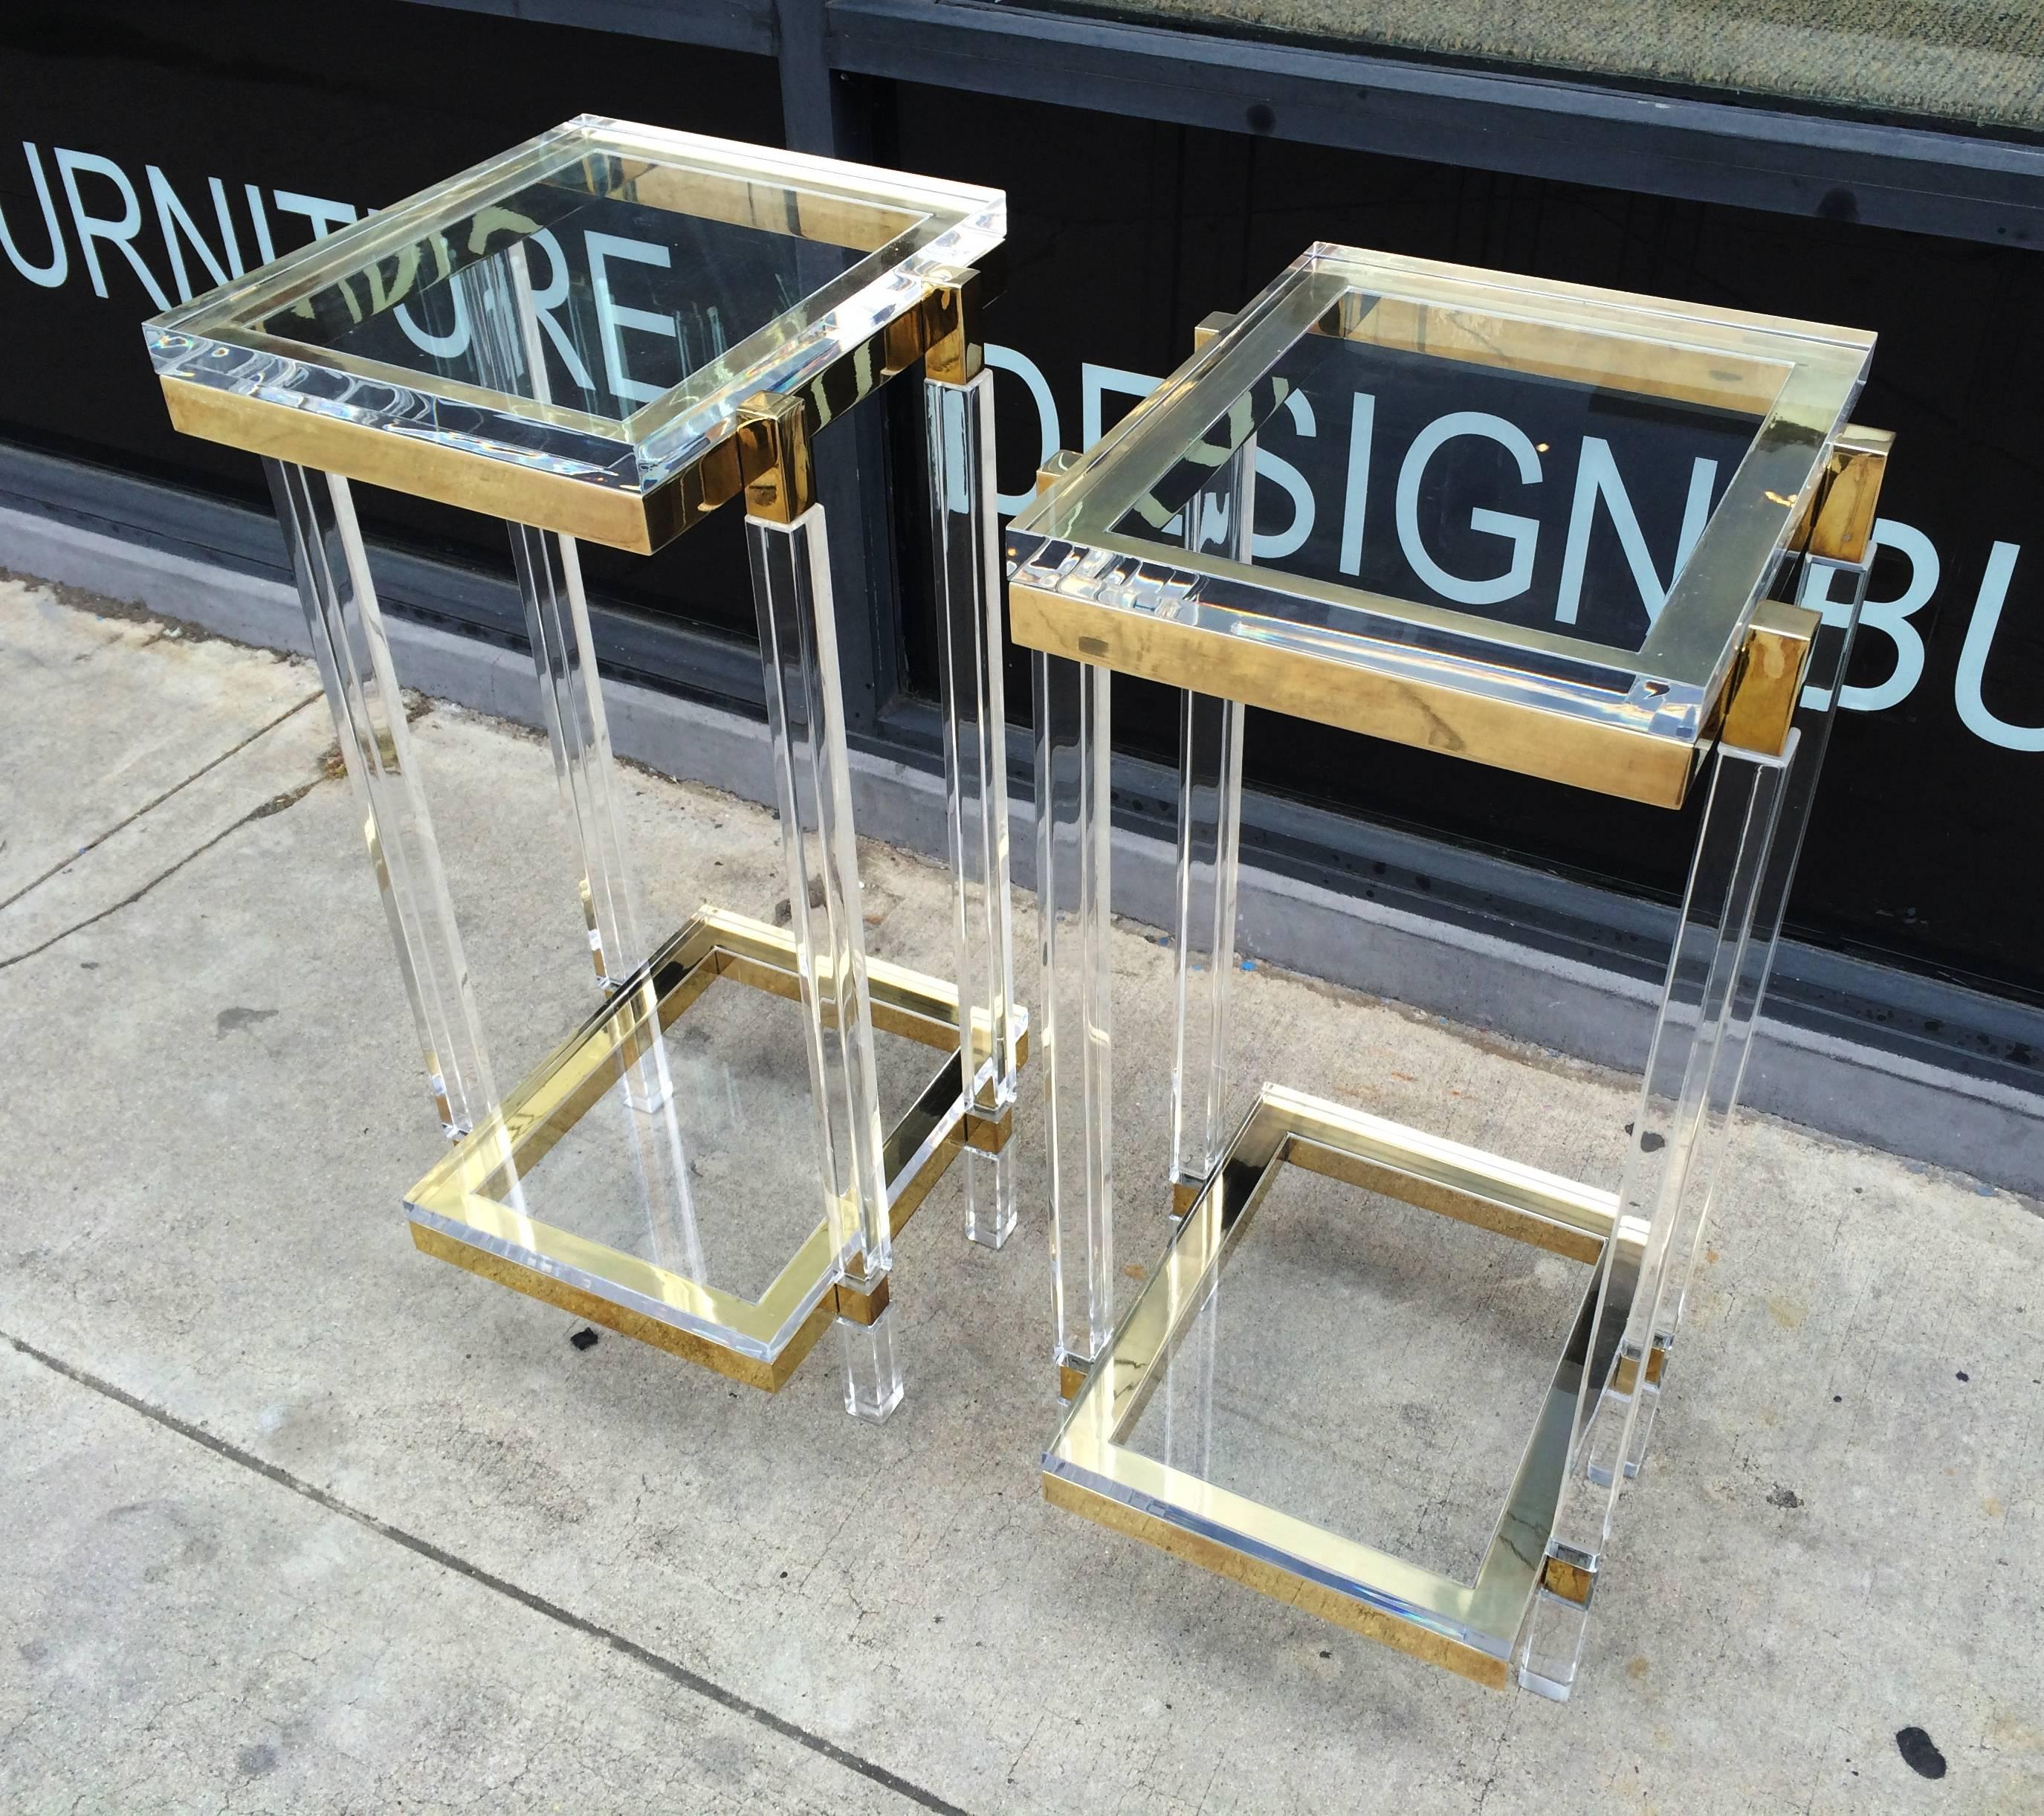 Beautiful set of tall side tables or pedestals in Lucite and brass by Charles Hollis Jones.
The tables are in excellent condition, we have two sets, one is brass and one in nickel.
The pieces are in excellent original condition, the brass is